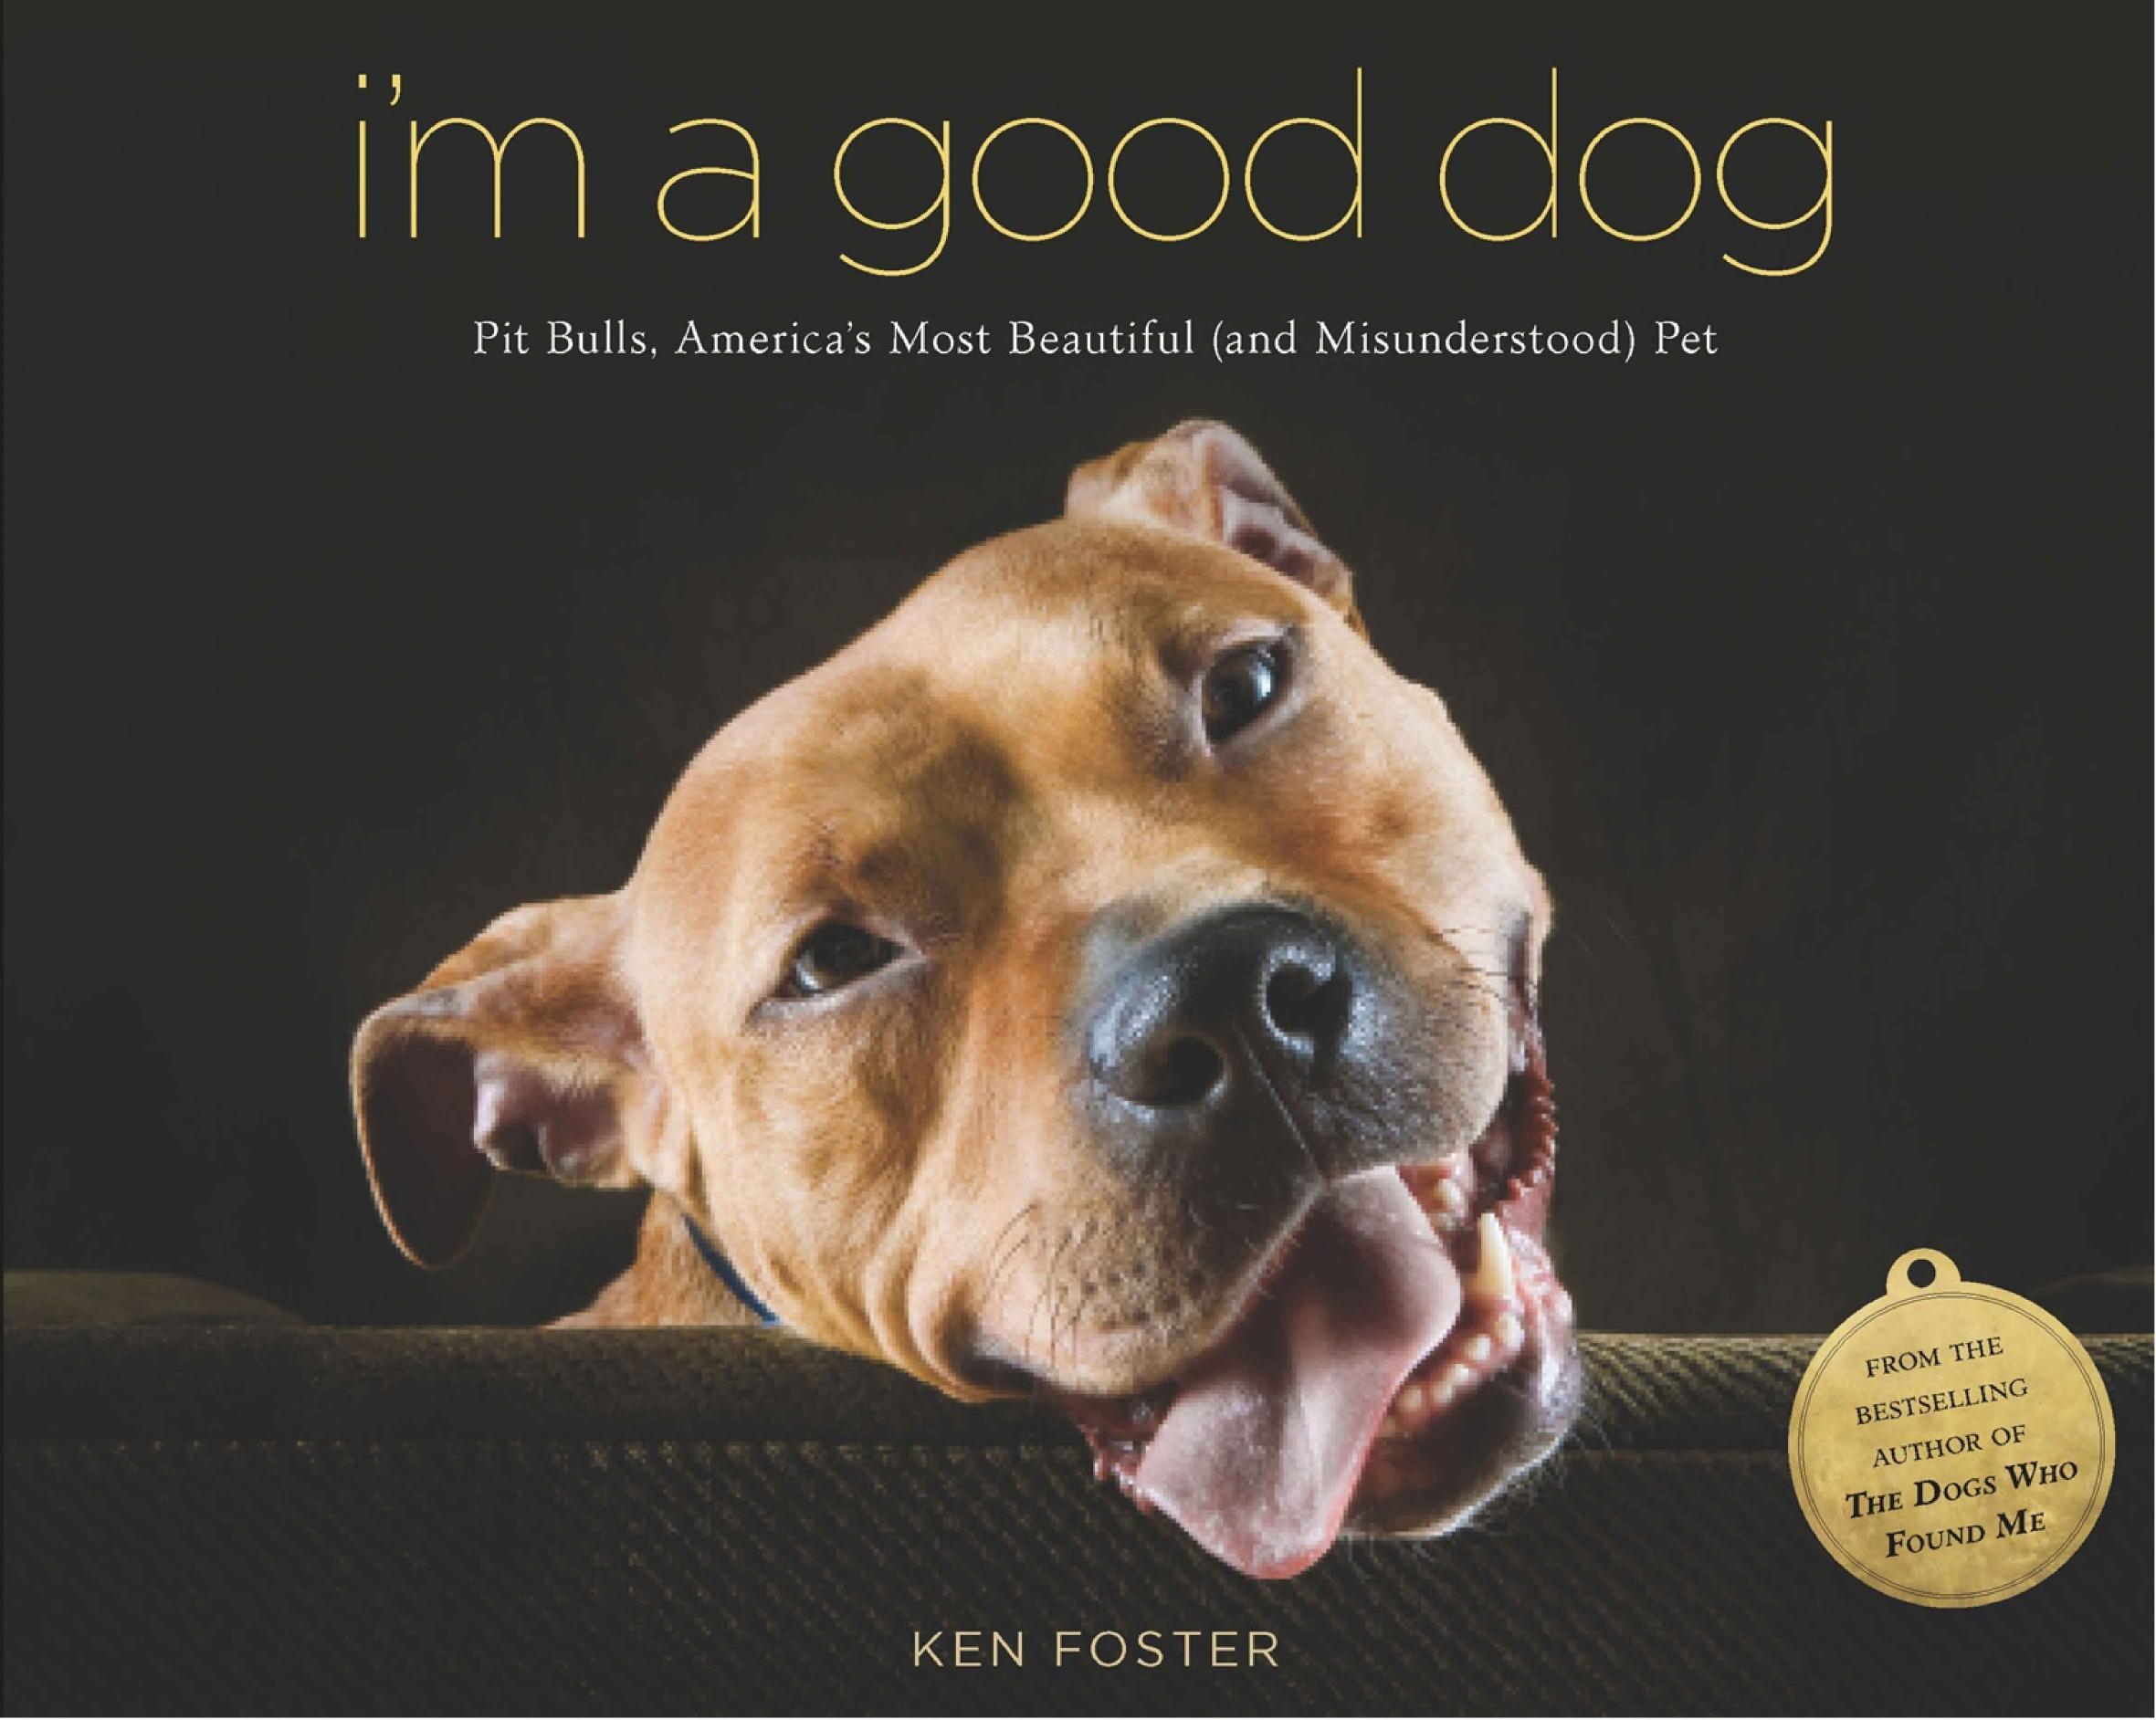 I'm a Good Dog: Pit Bulls, America's Most Beautiful by Ken Foster